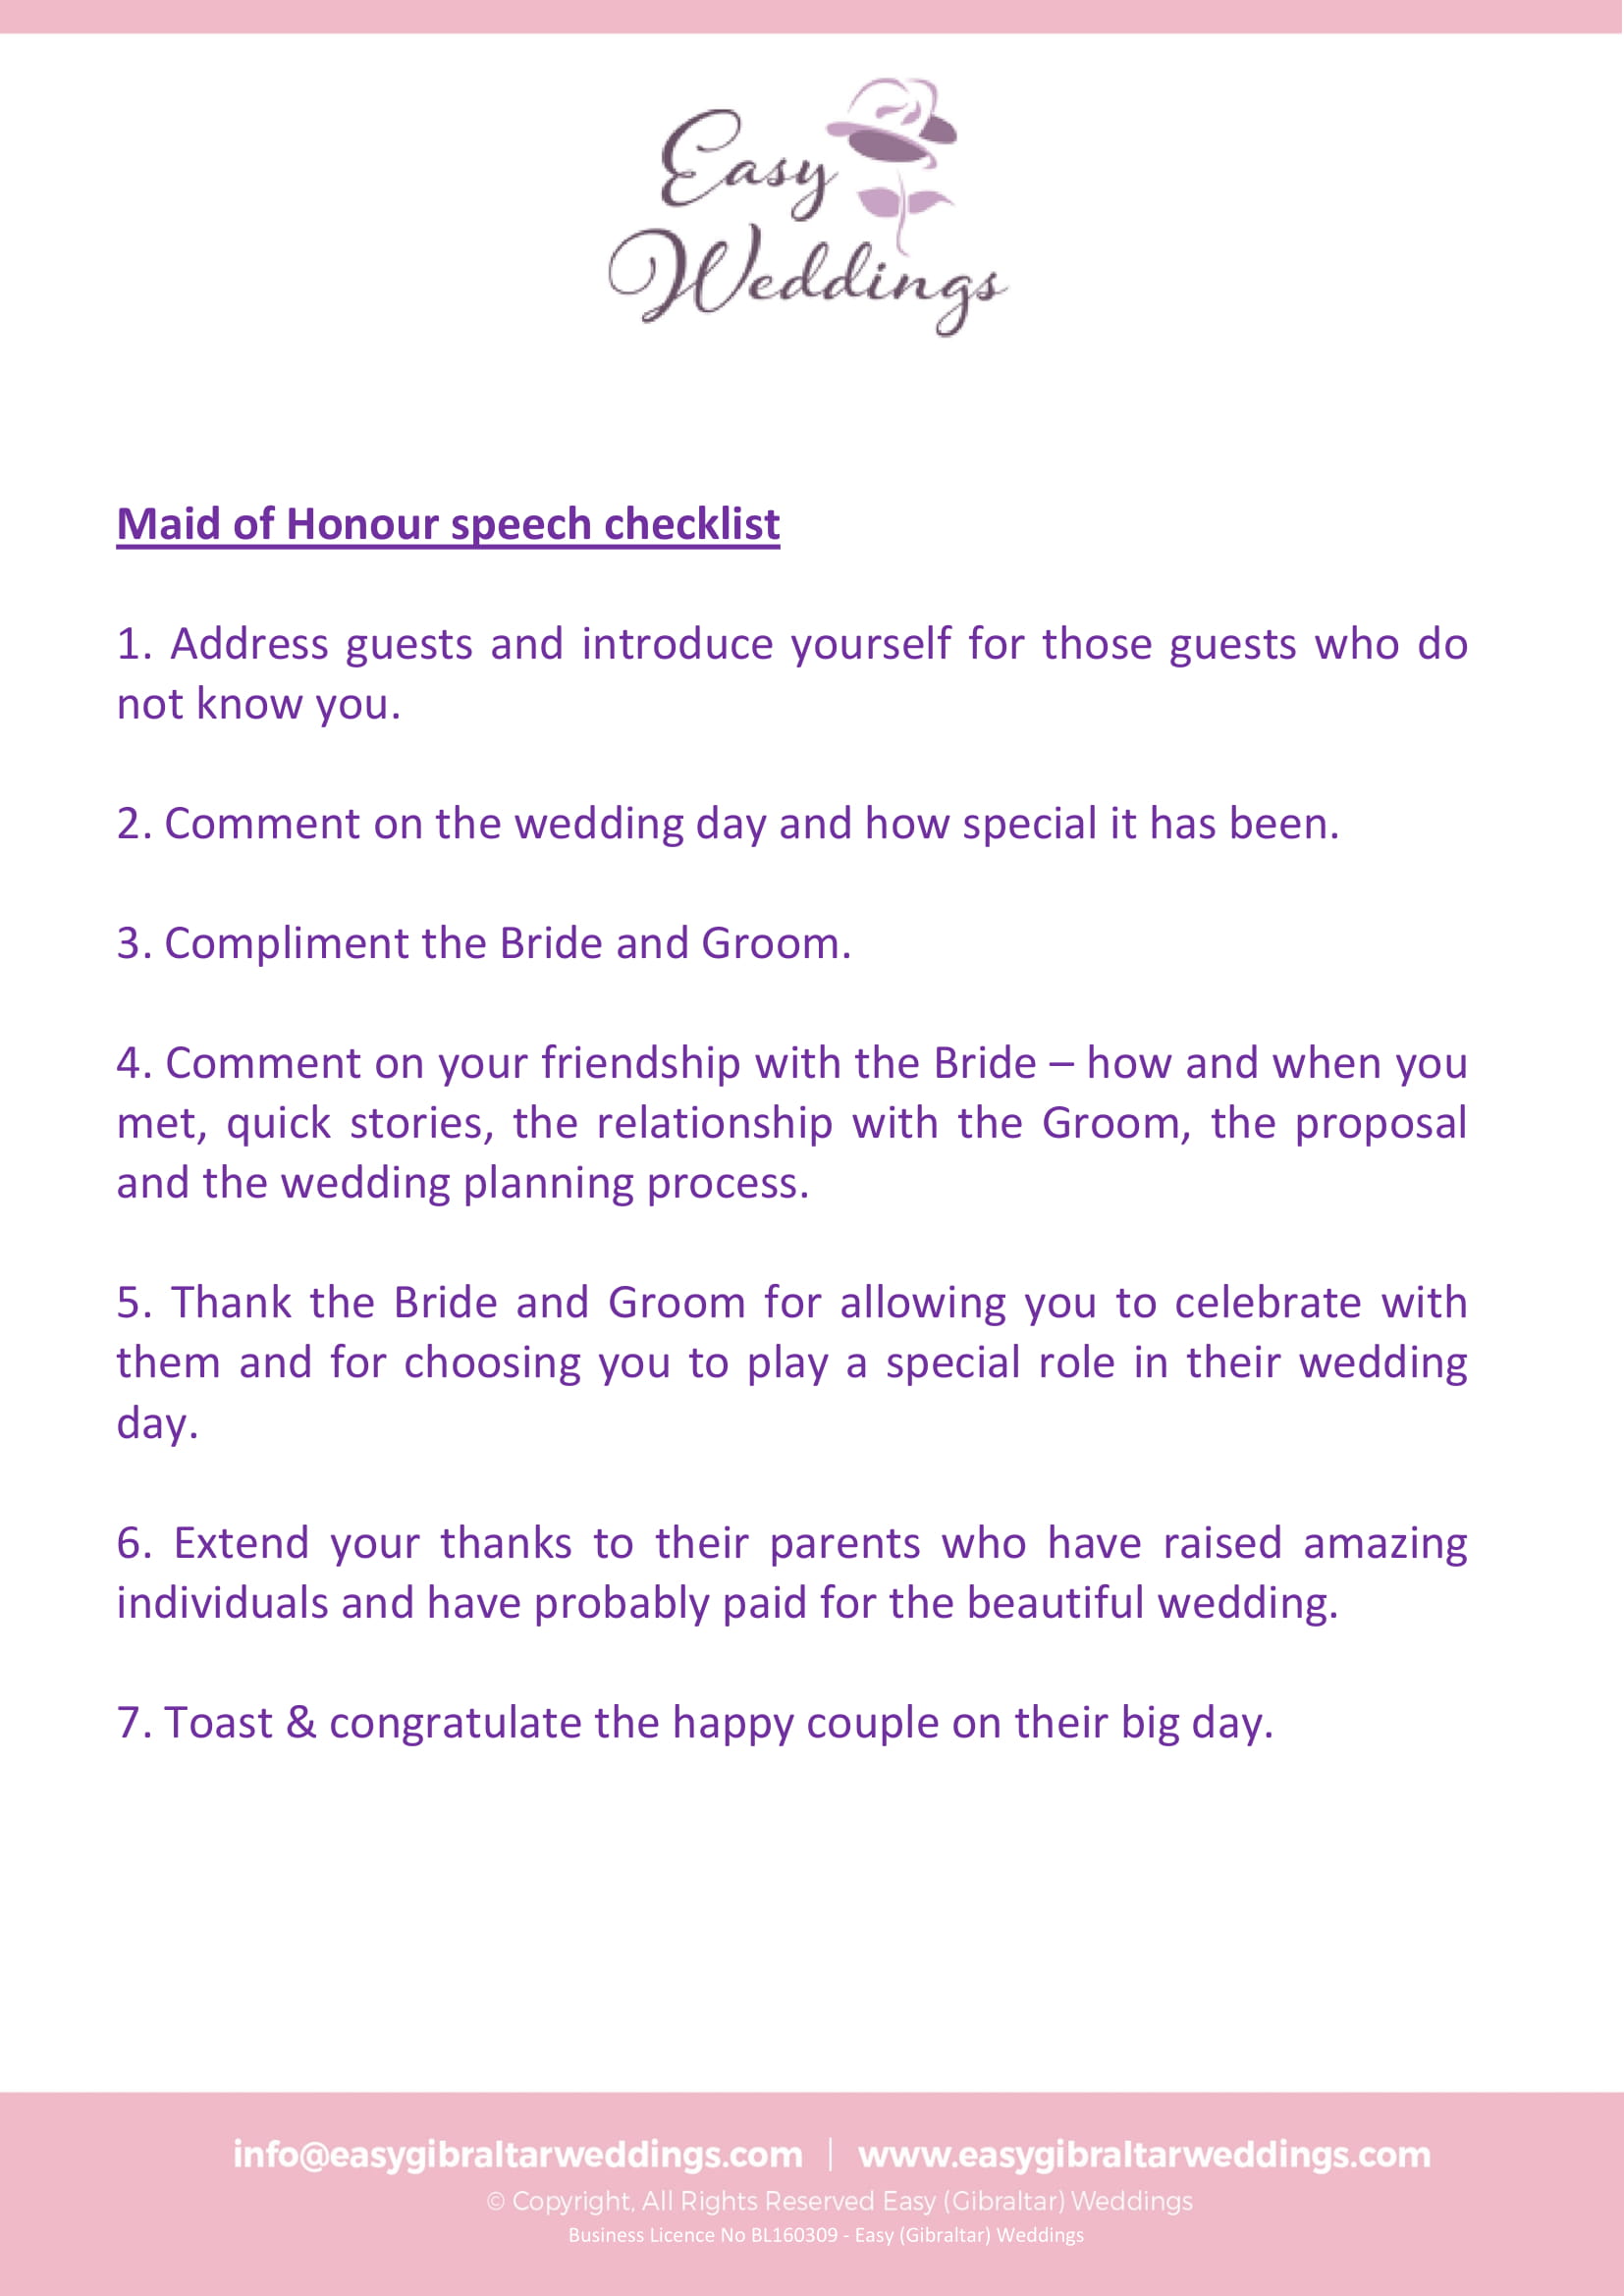 Pay someone to write maid of honor speech